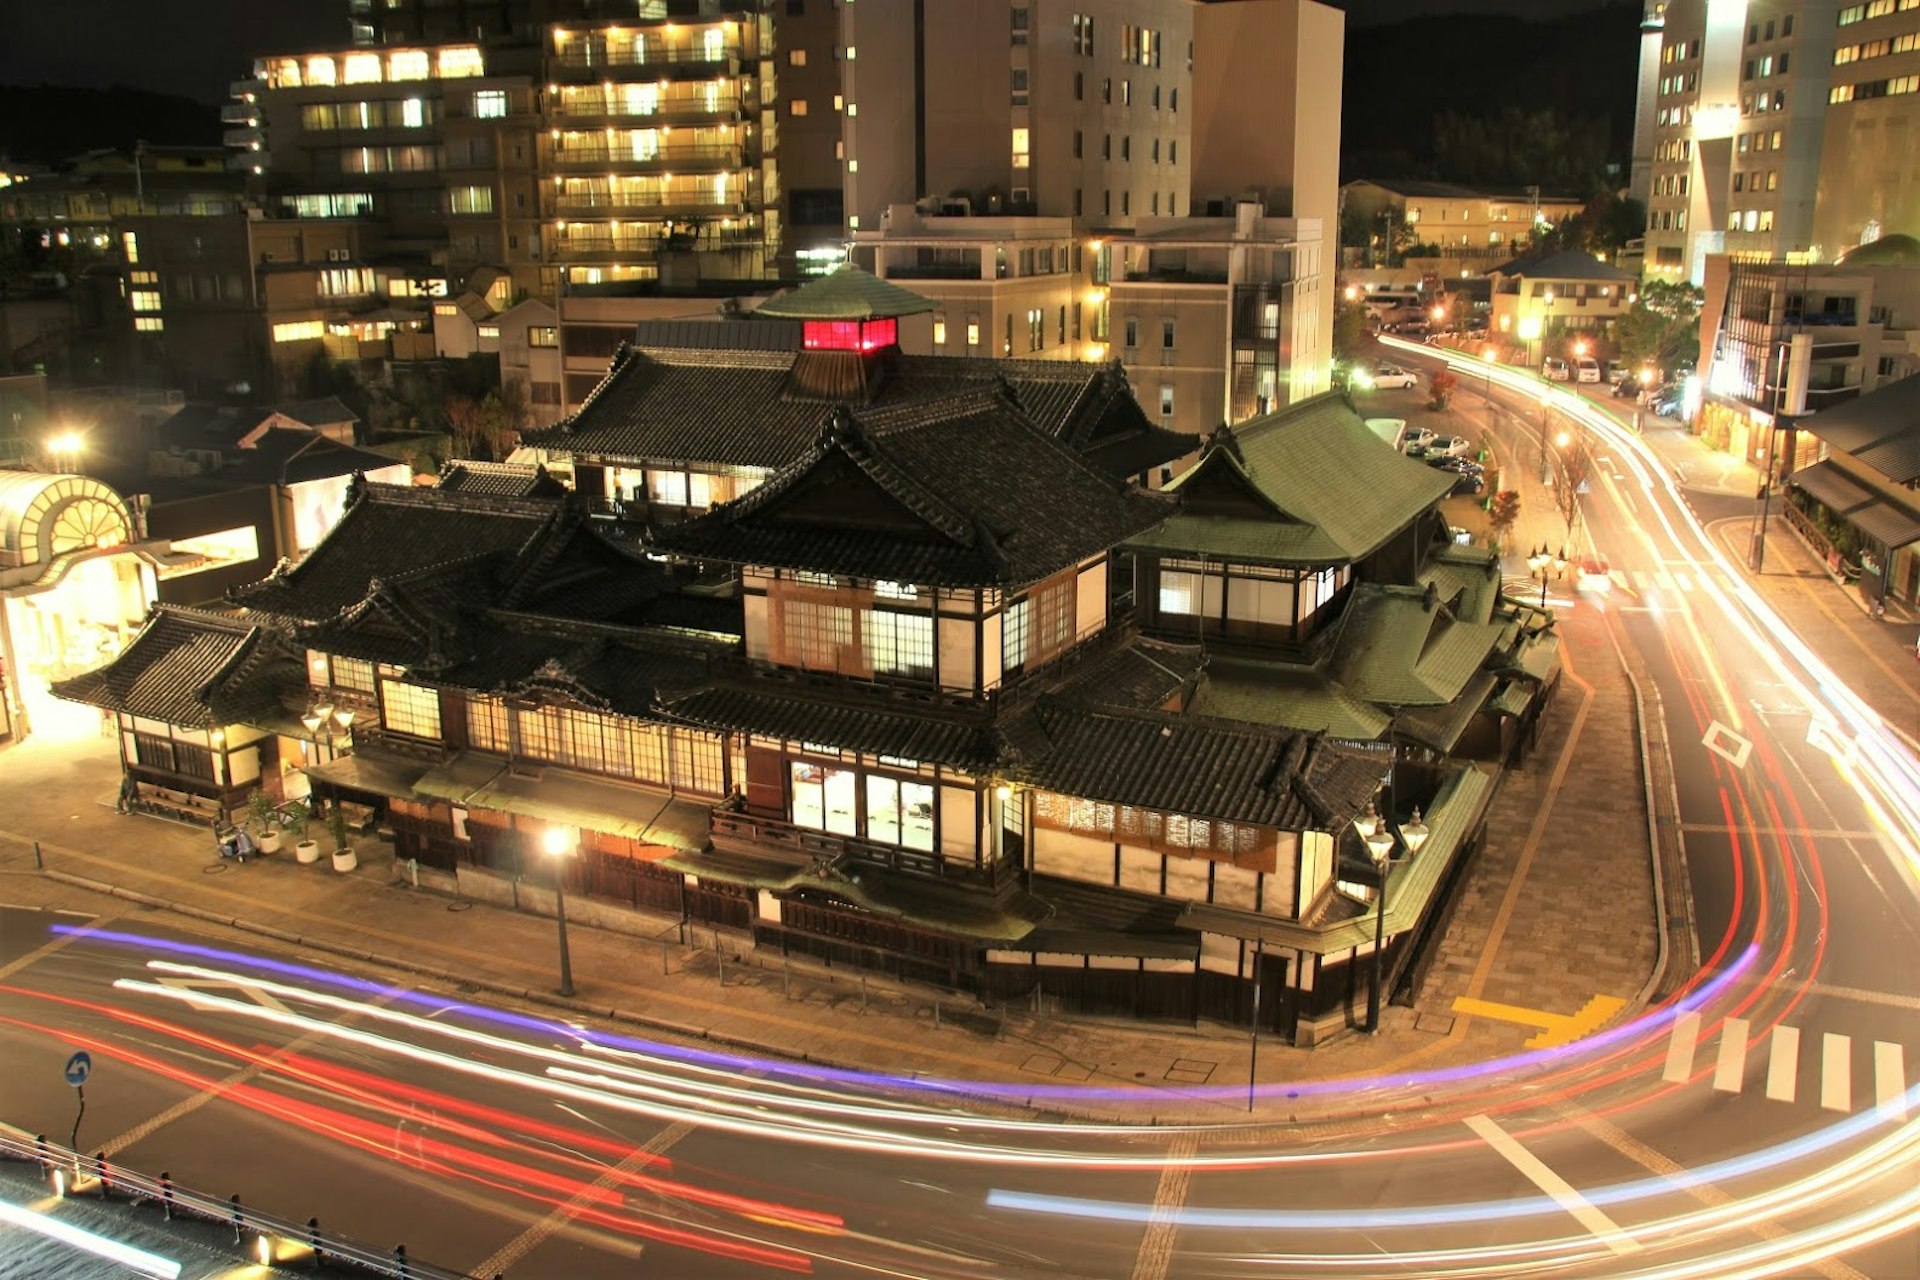 A night time shot of the historic Meiji-era sloped, tiled roof of the Dogo Onsen in Ehime Prefecture, with the trails of car headlights and brake lights streaking the road around the structure